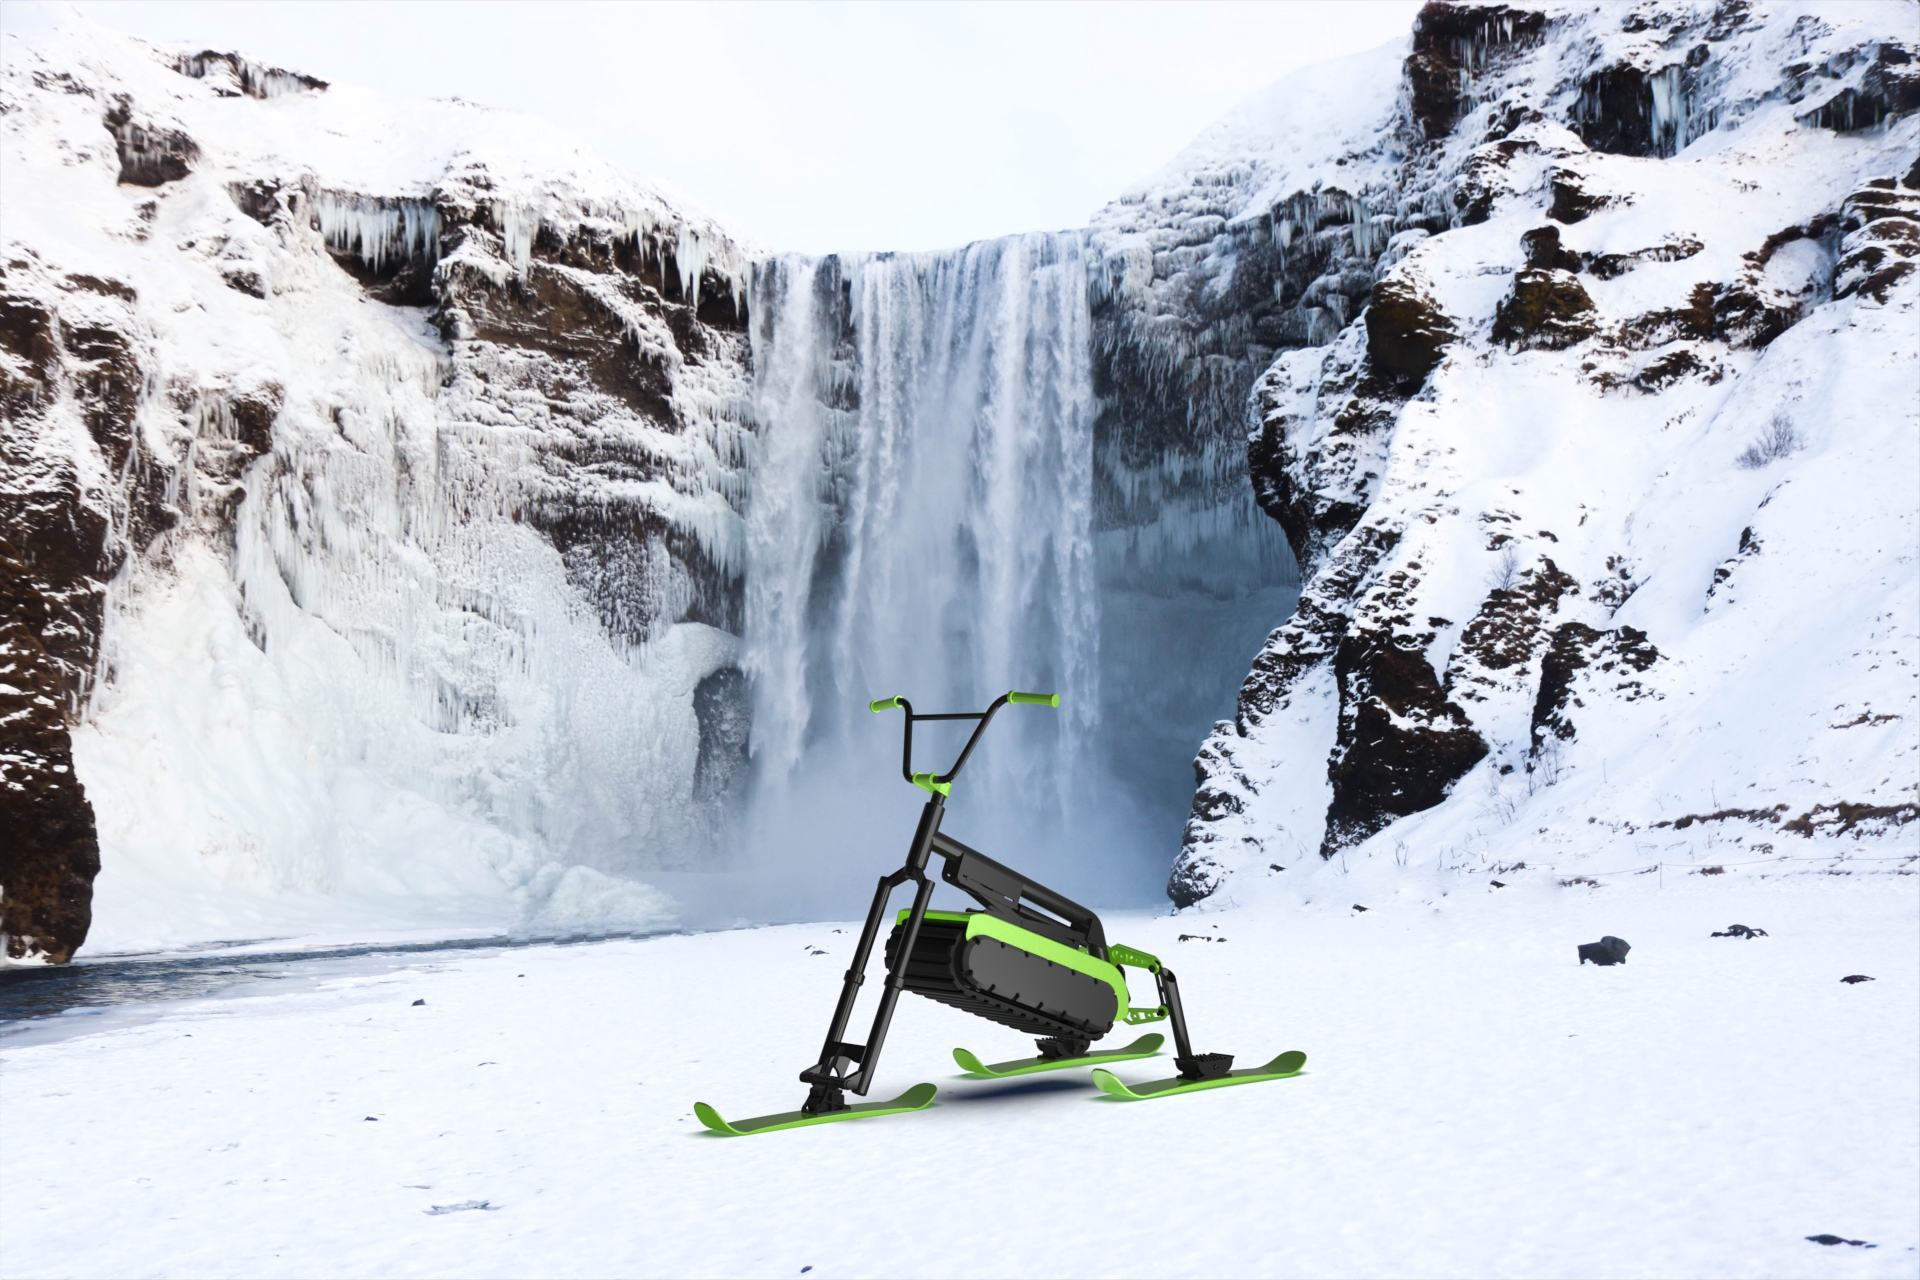 SNO FLO is a stylish and innovative snow scooter